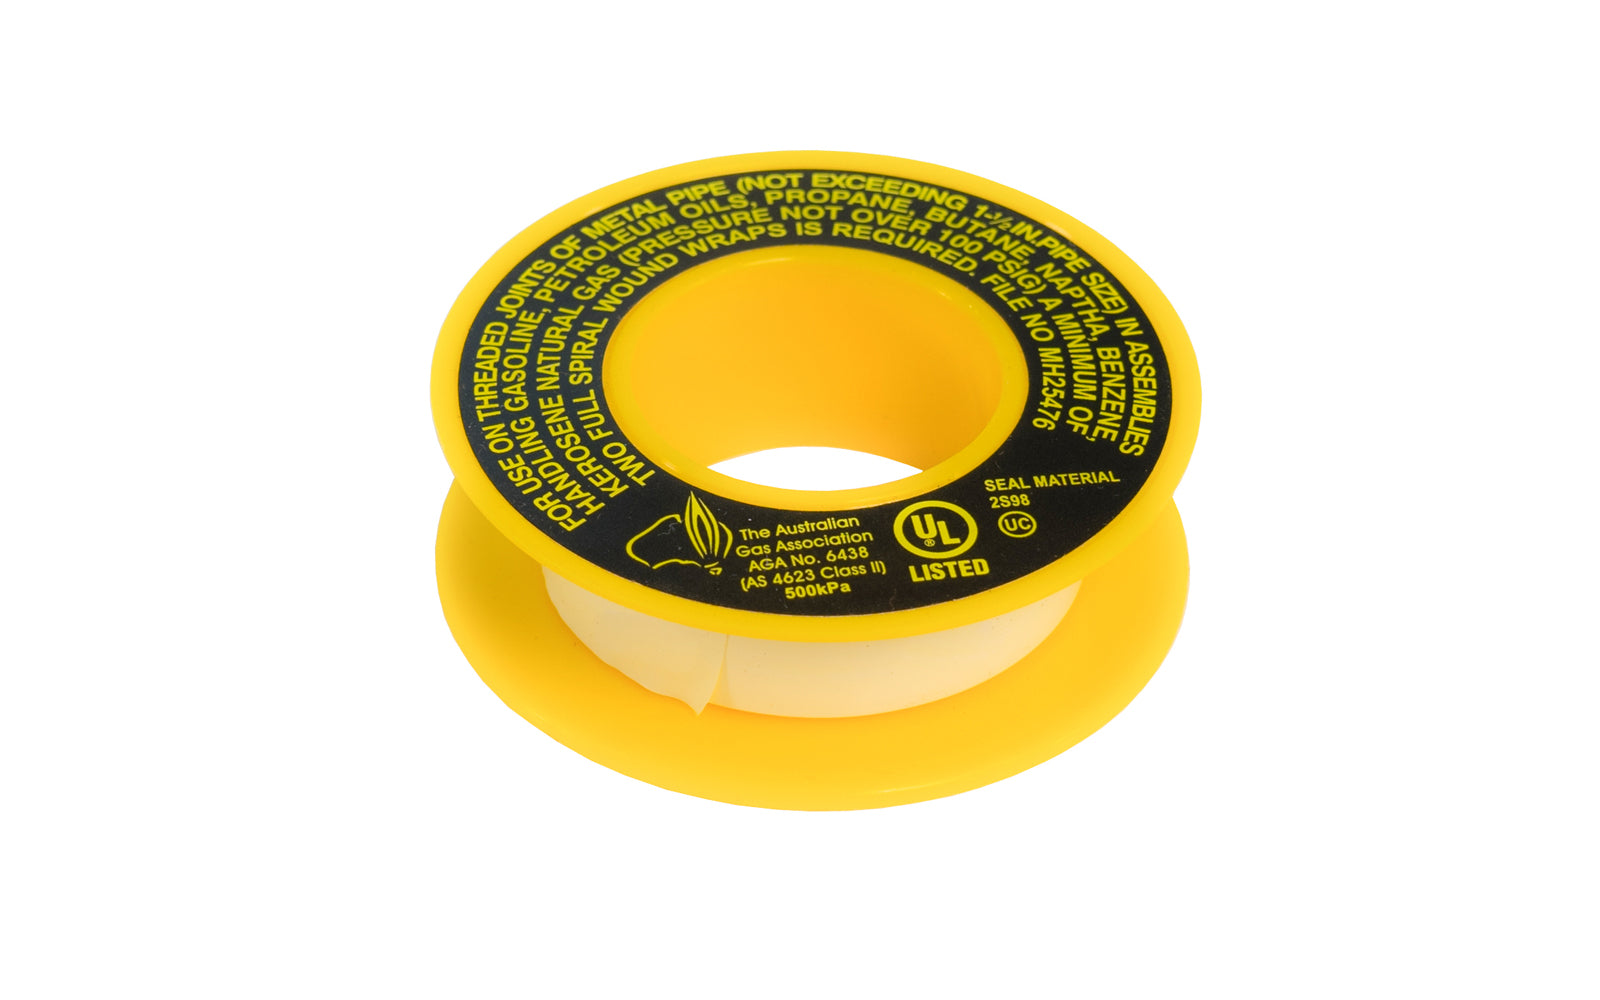 1/2" x 260" Yellow Thread Seal Gas Line Tape. Ideally suited for all threaded connections involving gas line installations for natural gas, propane, butane, and/or water, oil, and chemicals. Sold as one spool each. Made by Oatey / Harvey. 